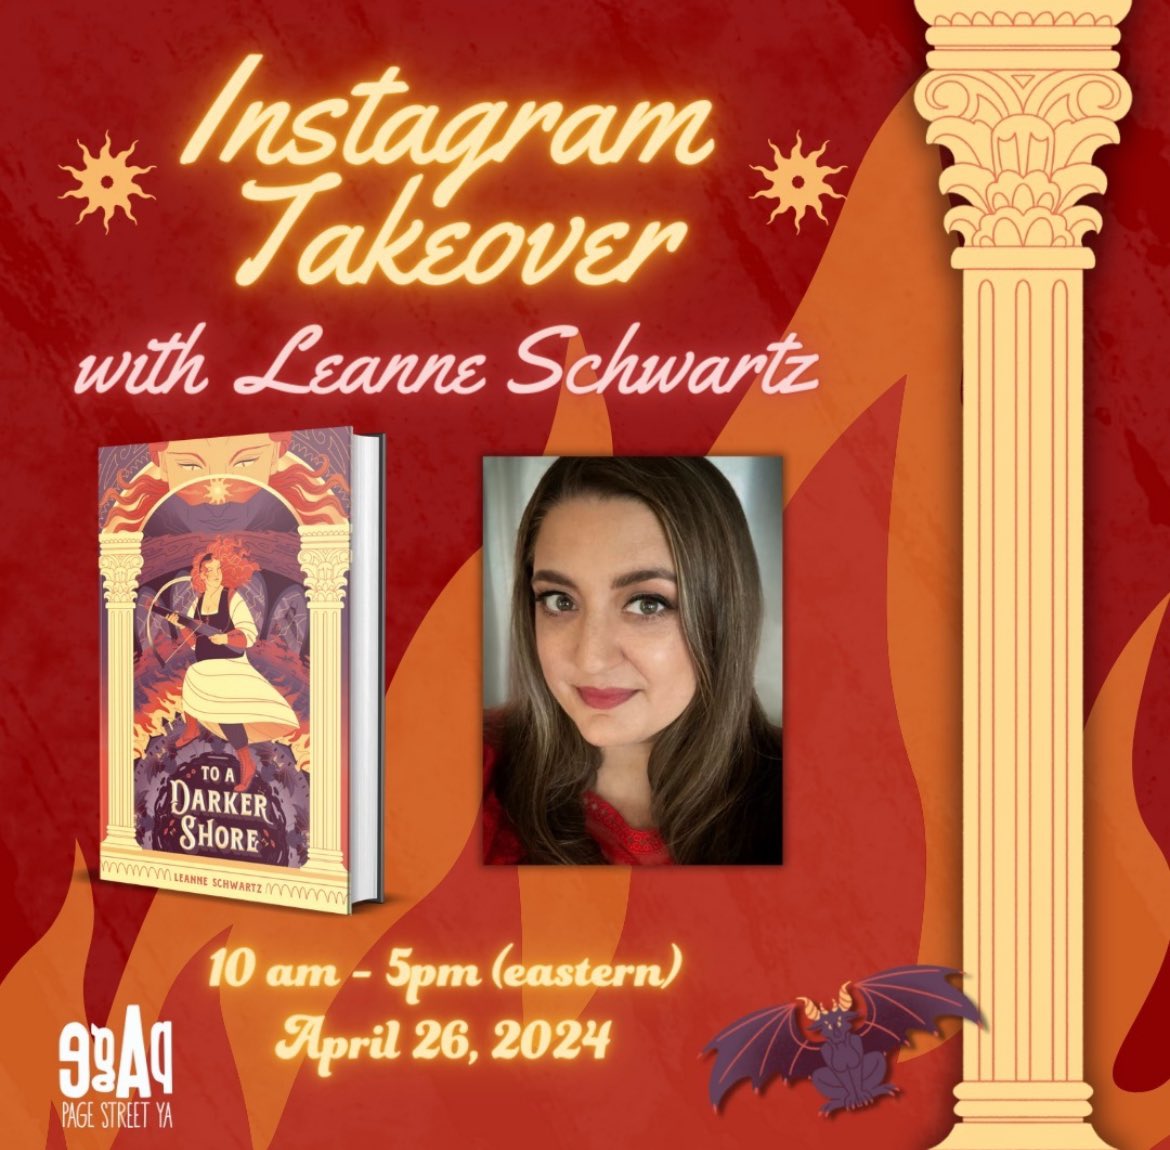 They’re letting me take over Page Street’s insta tomorrow so bring your questions and I’ll bring you along through my day prepping for TADS’s launch❤️‍🔥